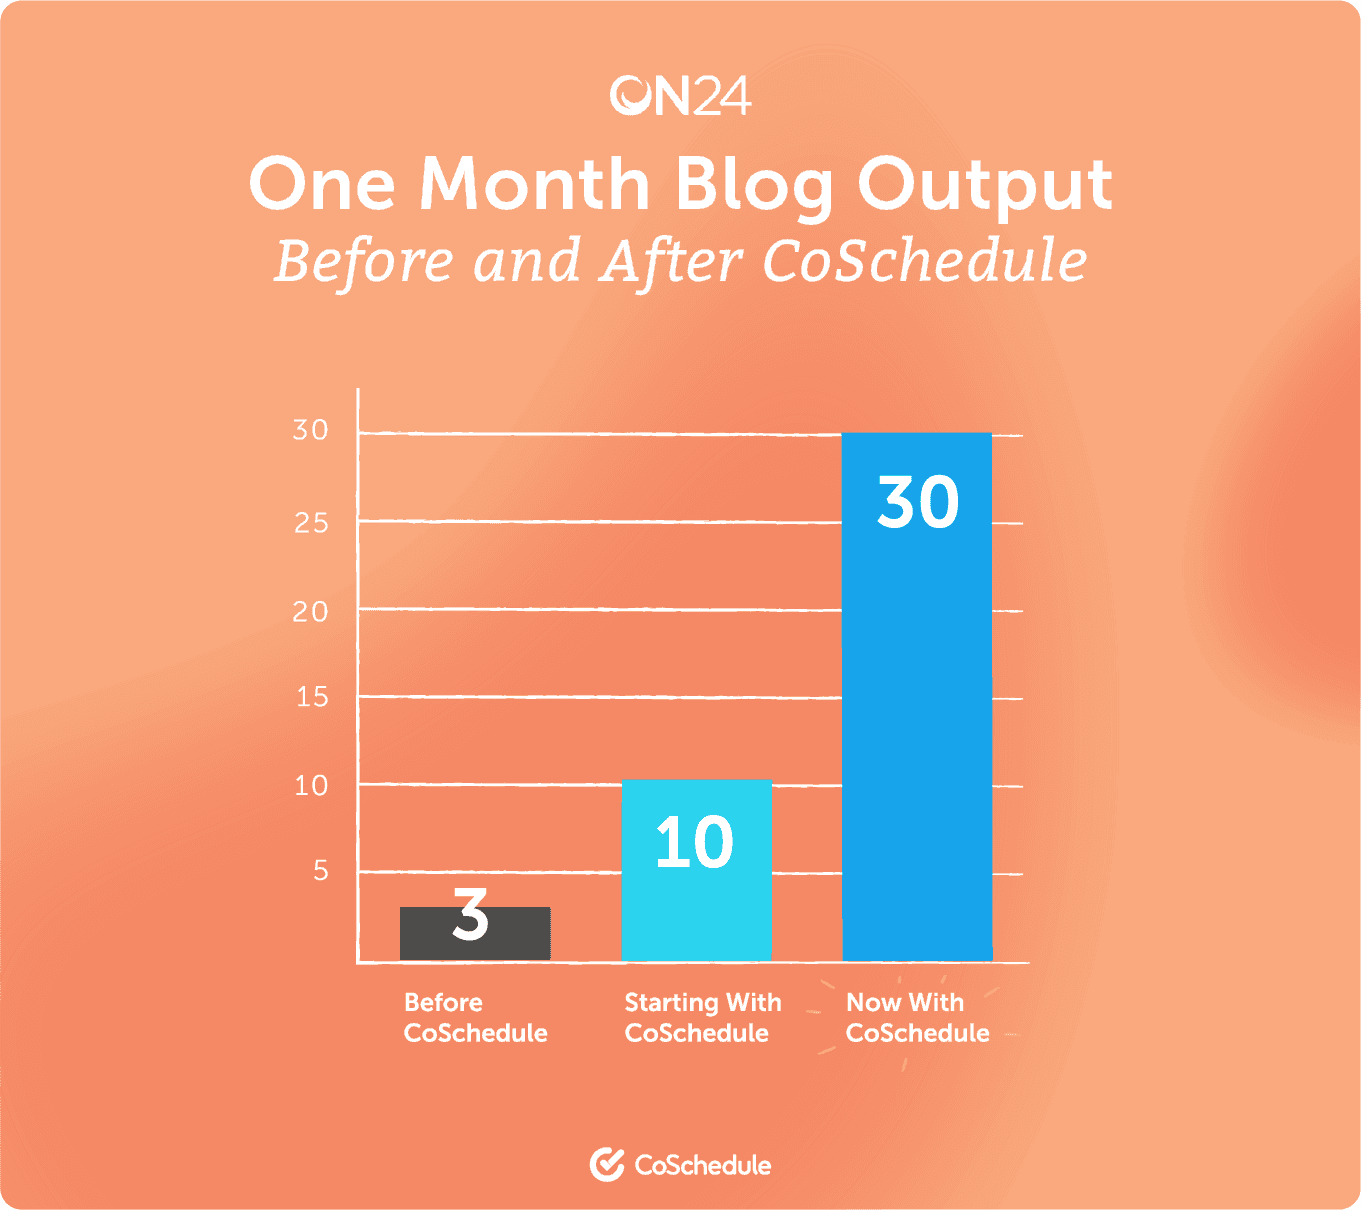 ON24 one month blog output before and after CoSchedule